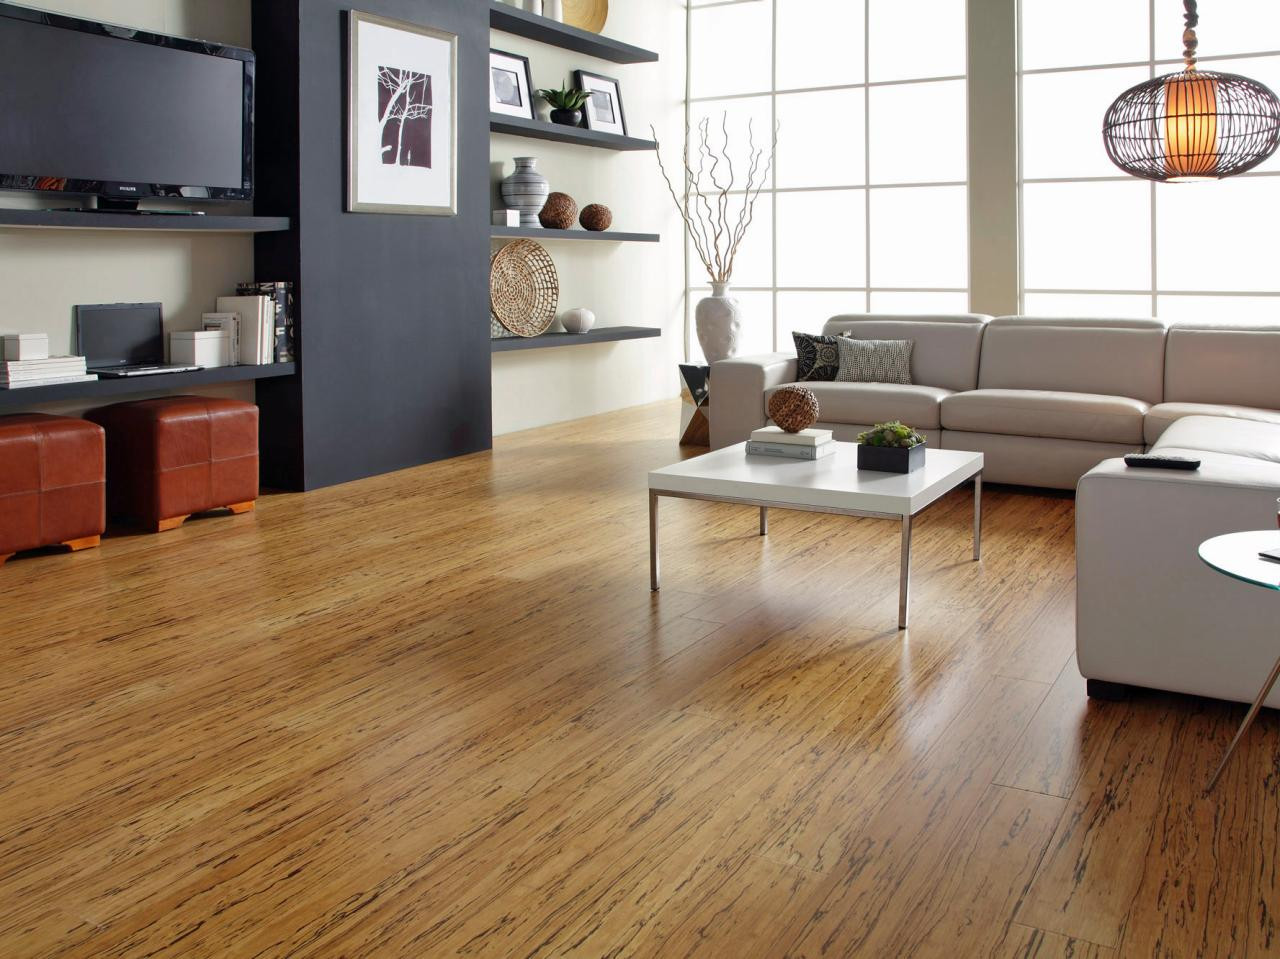 Floors Ideas For Living Room
 Modern Laminate Floor Design with Contemporary Interiors